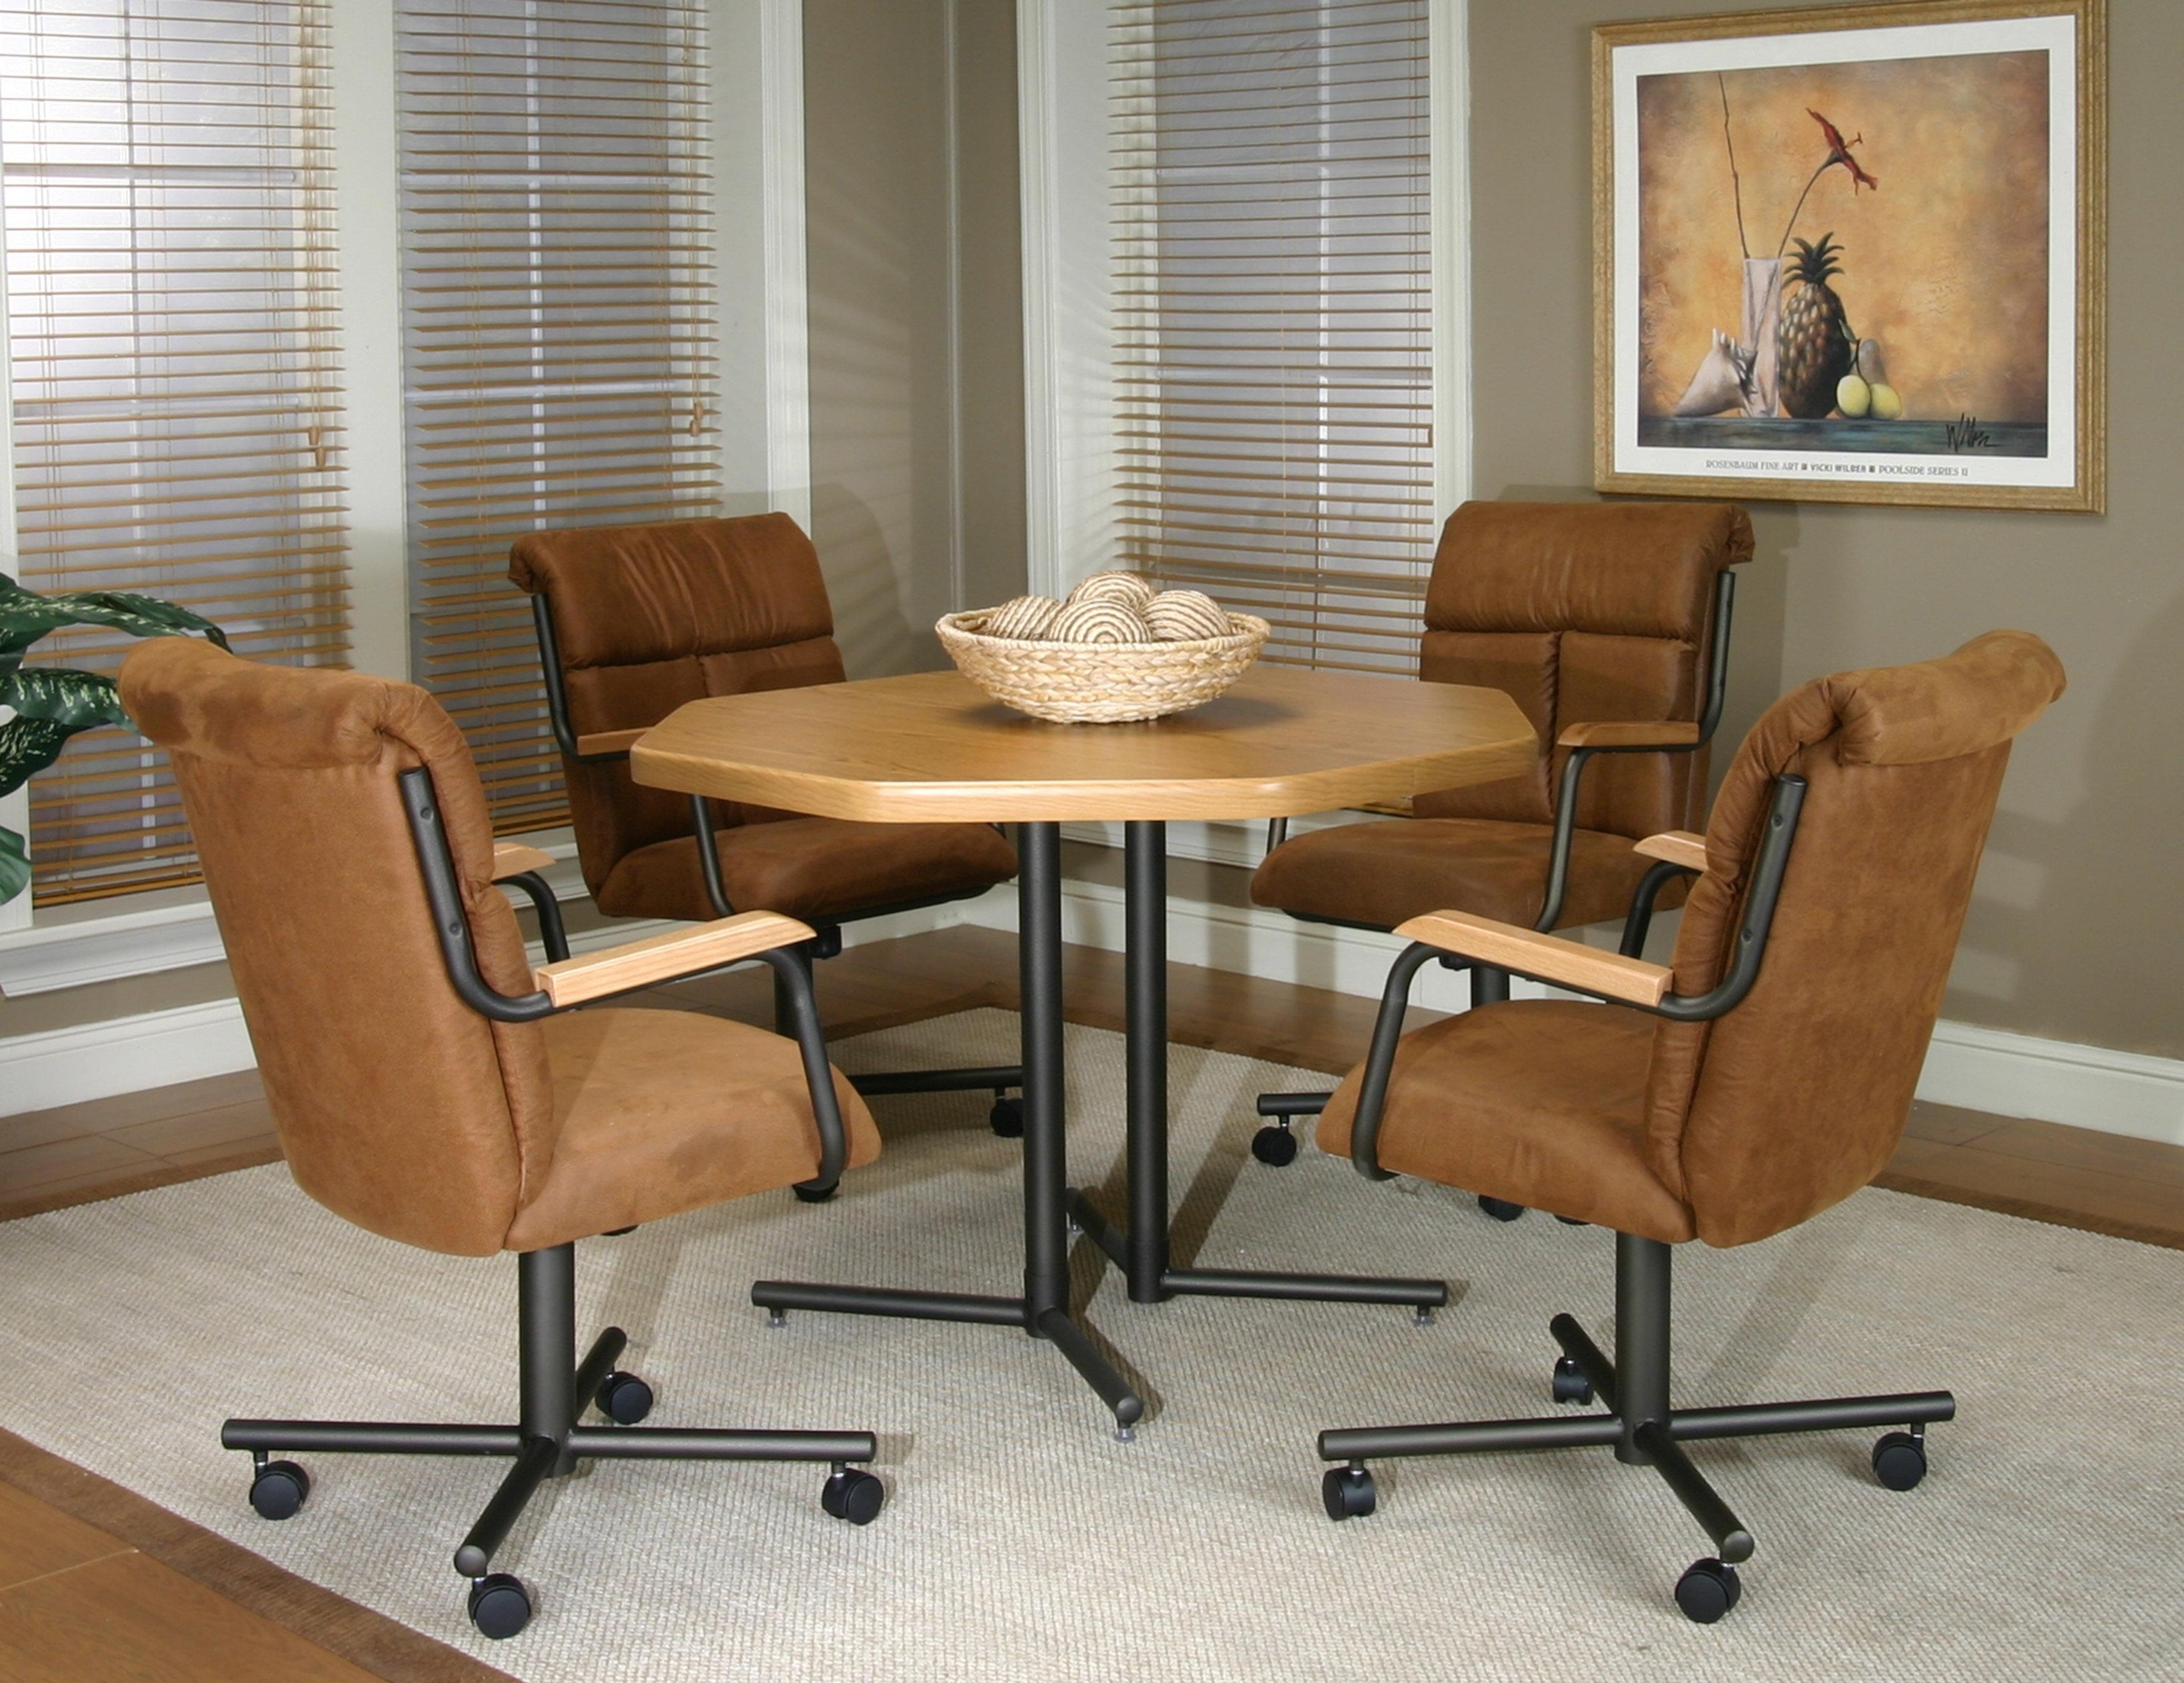 Dining Chairs With Casters You Ll Love, Dining Room Chairs With Wheels